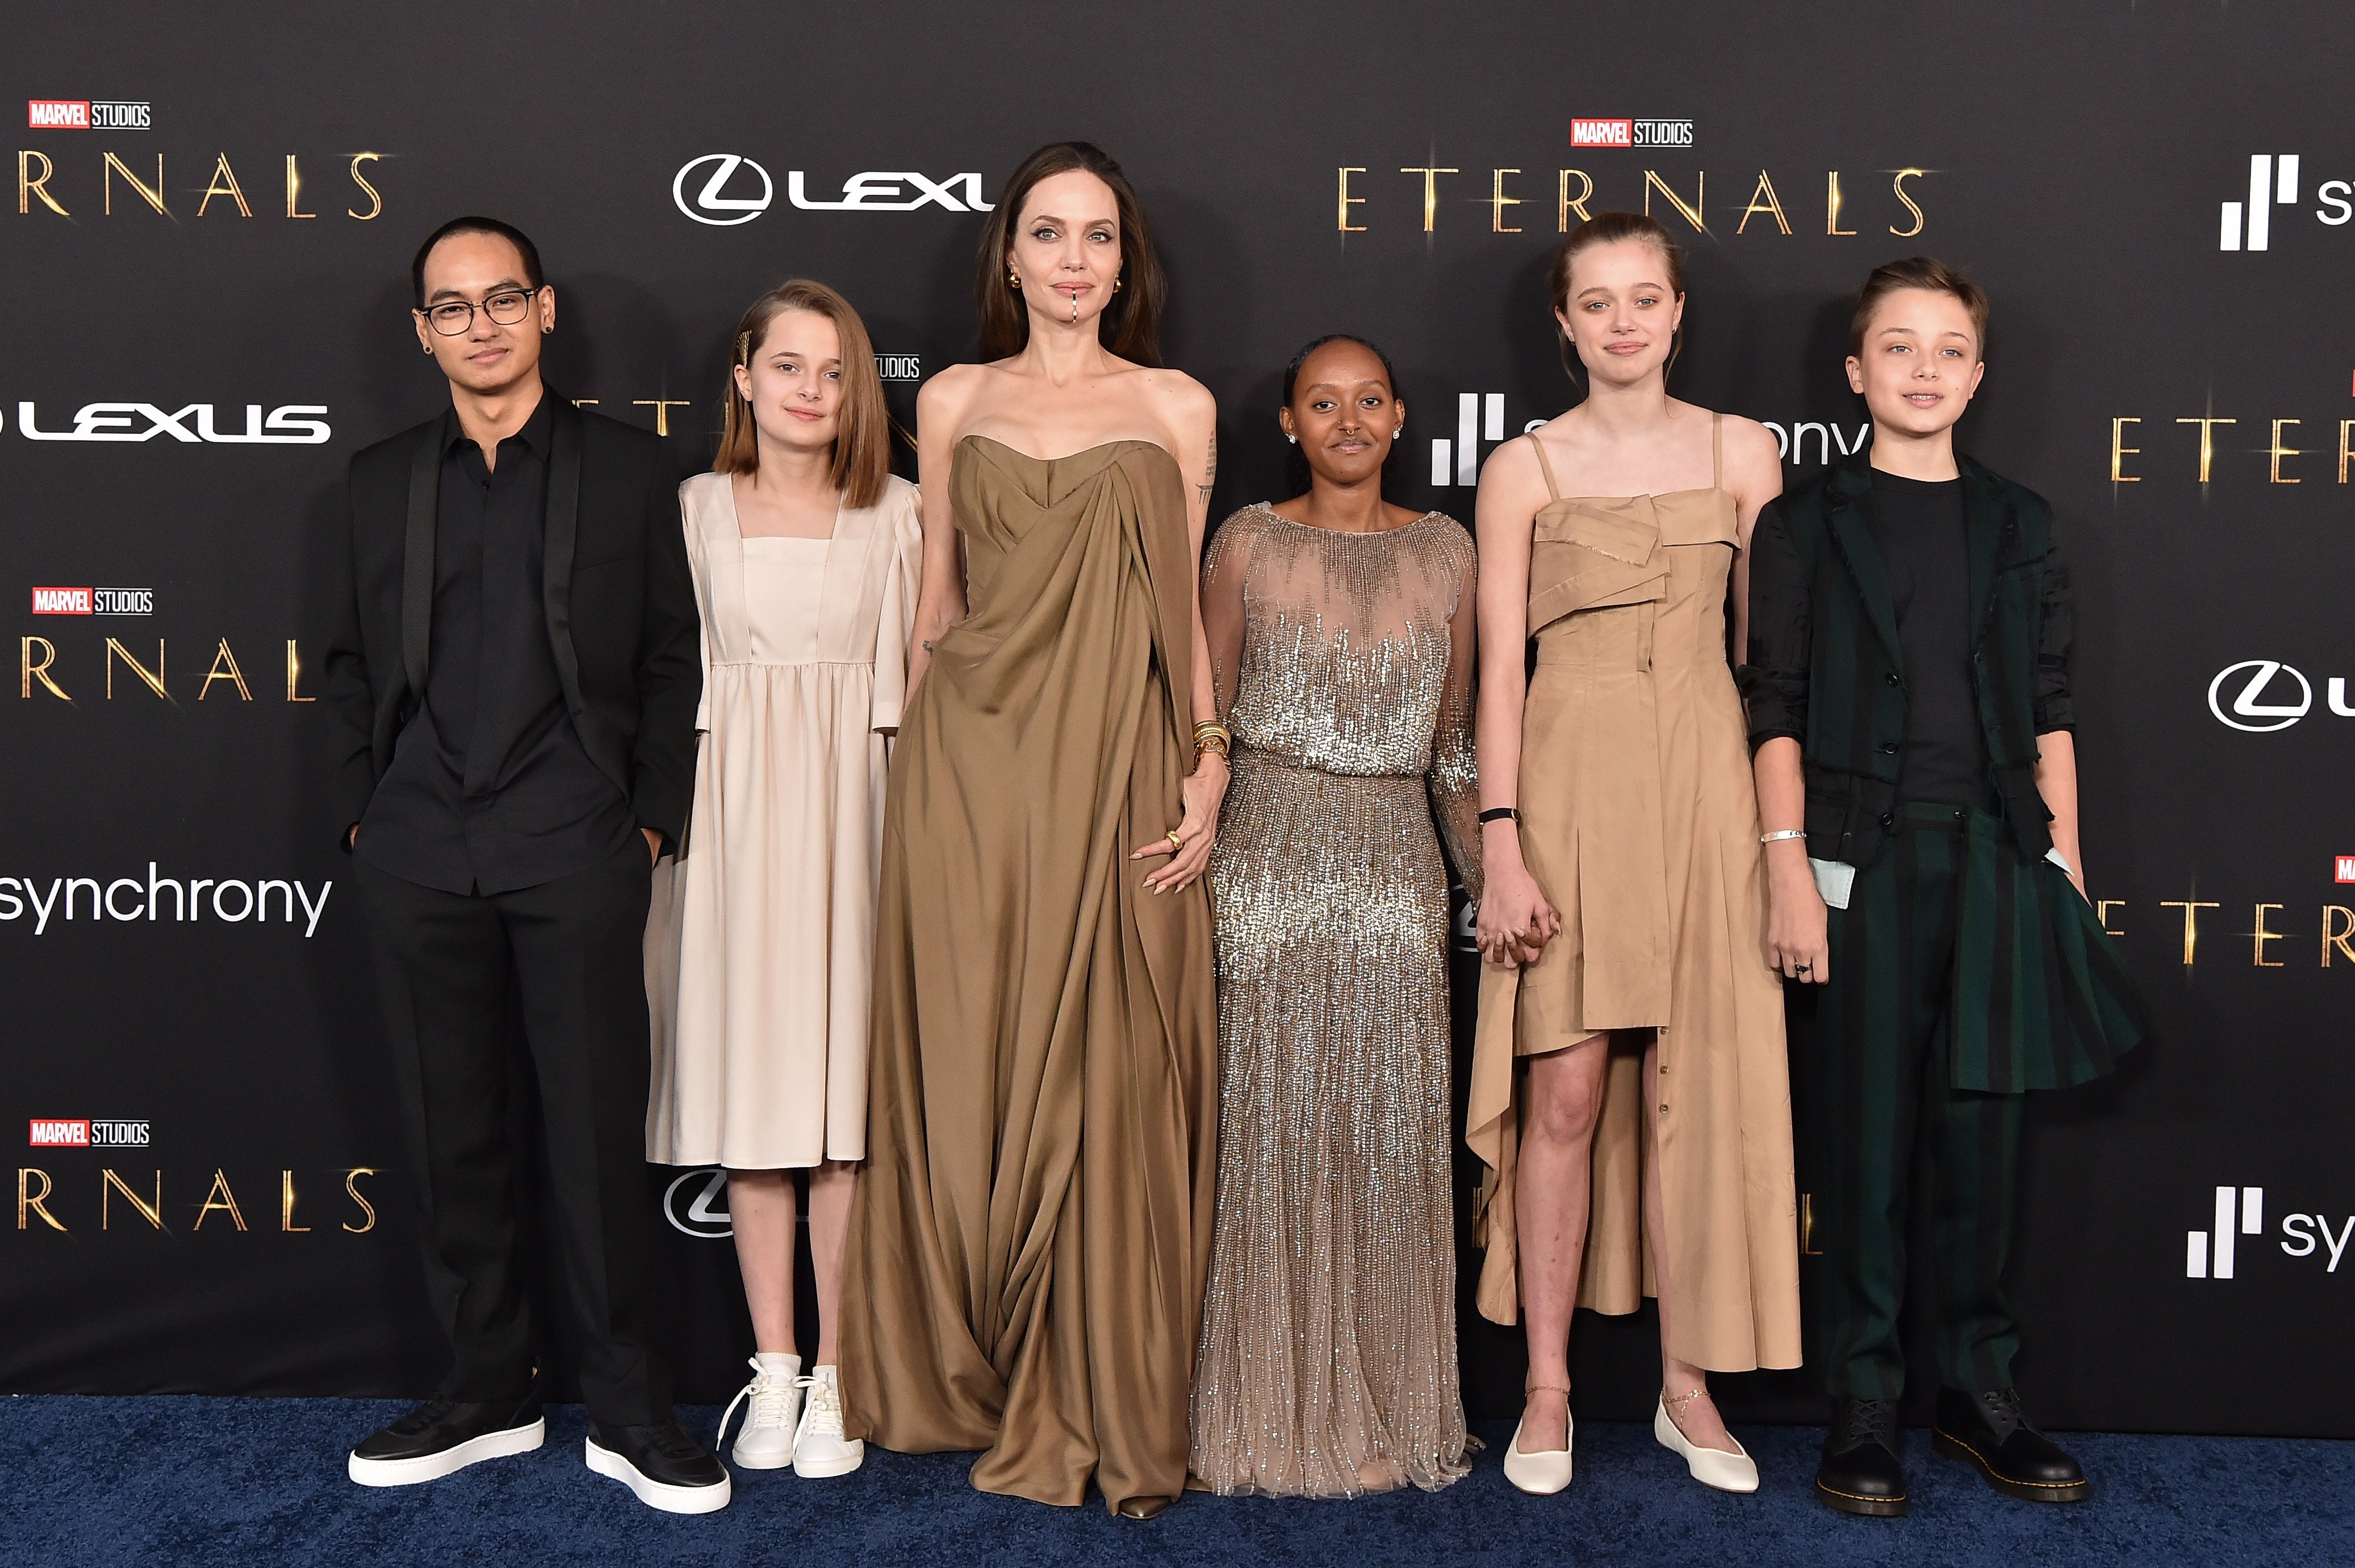 Maddox and Vivienne Jolie-Pitt, Angelina Jolie, Knox, Shiloh, and Zahara Jolie-Pitt at the Los Angeles premiere of "Eternals" on October 18, 2021, in California | Source: Getty Images